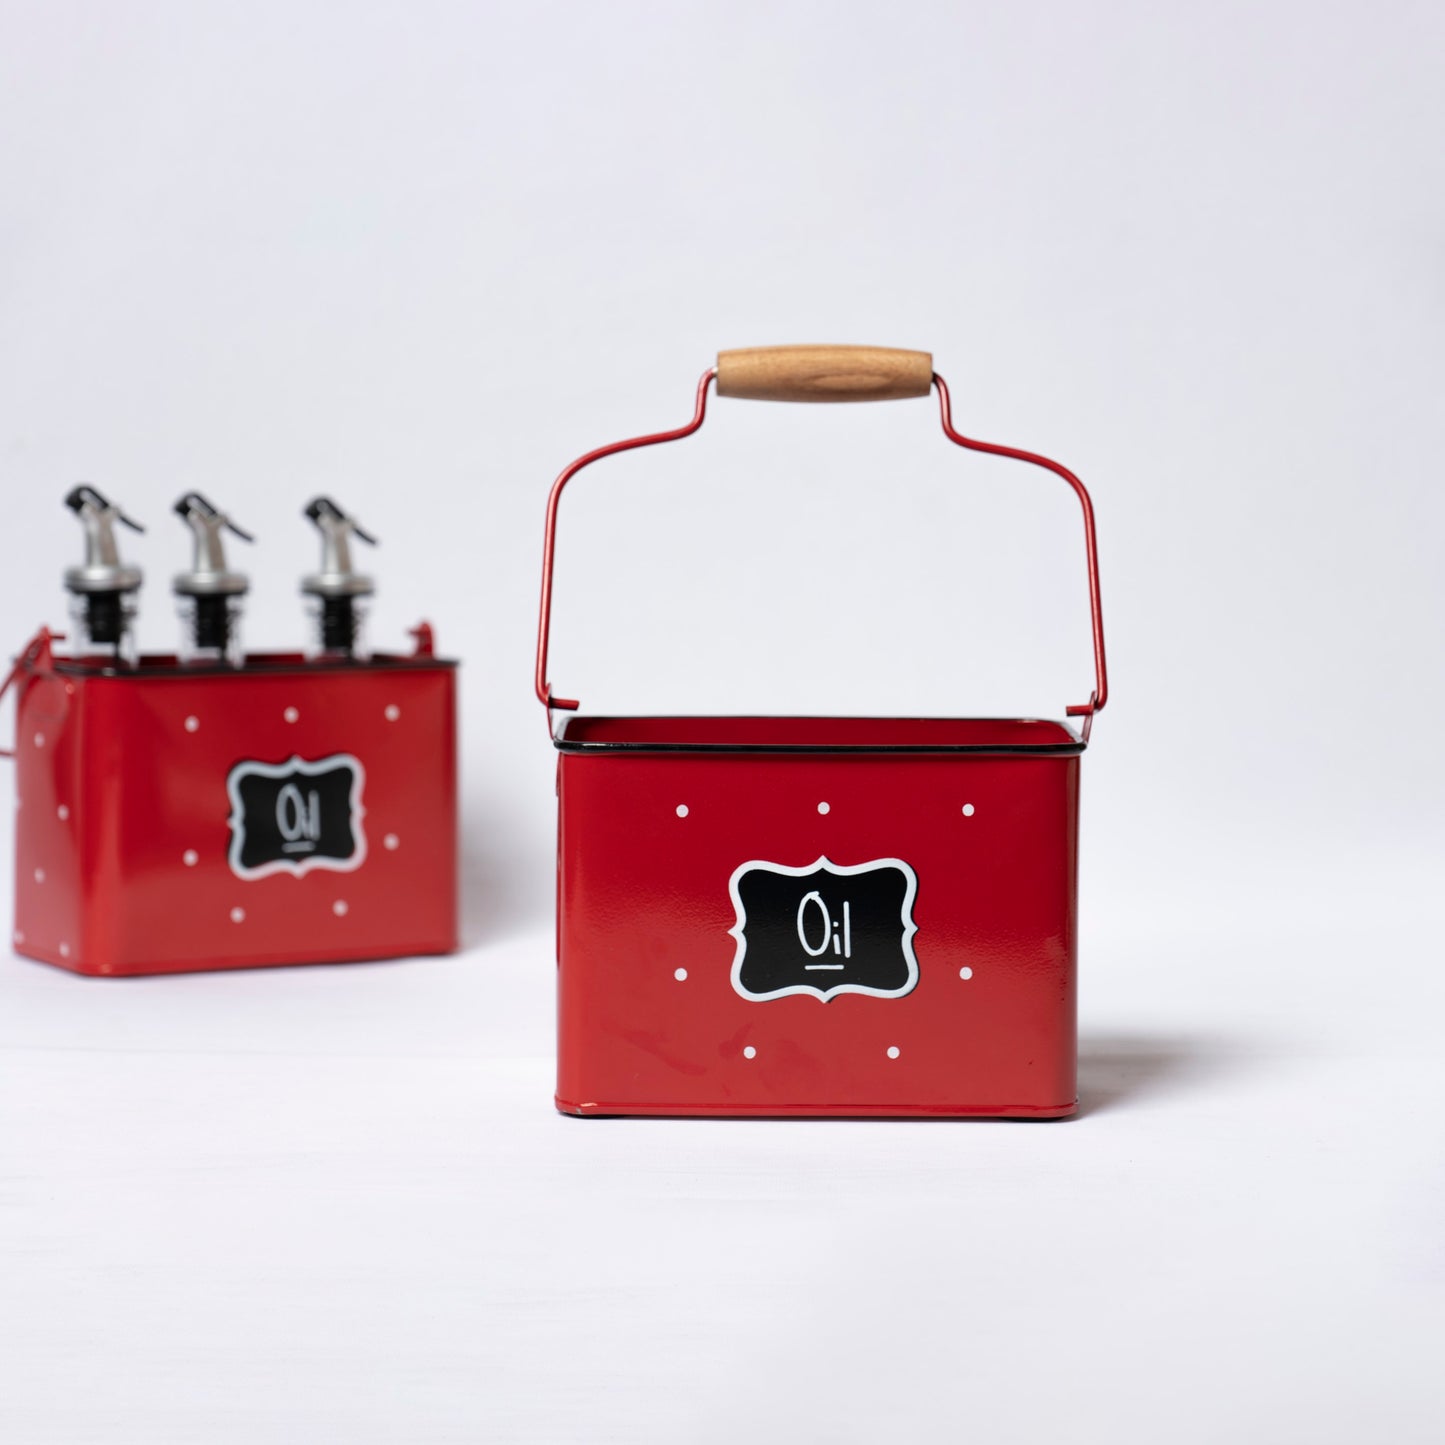 Polka Dot Steel Oil Caddy (Red) - OCST0001 - View 7